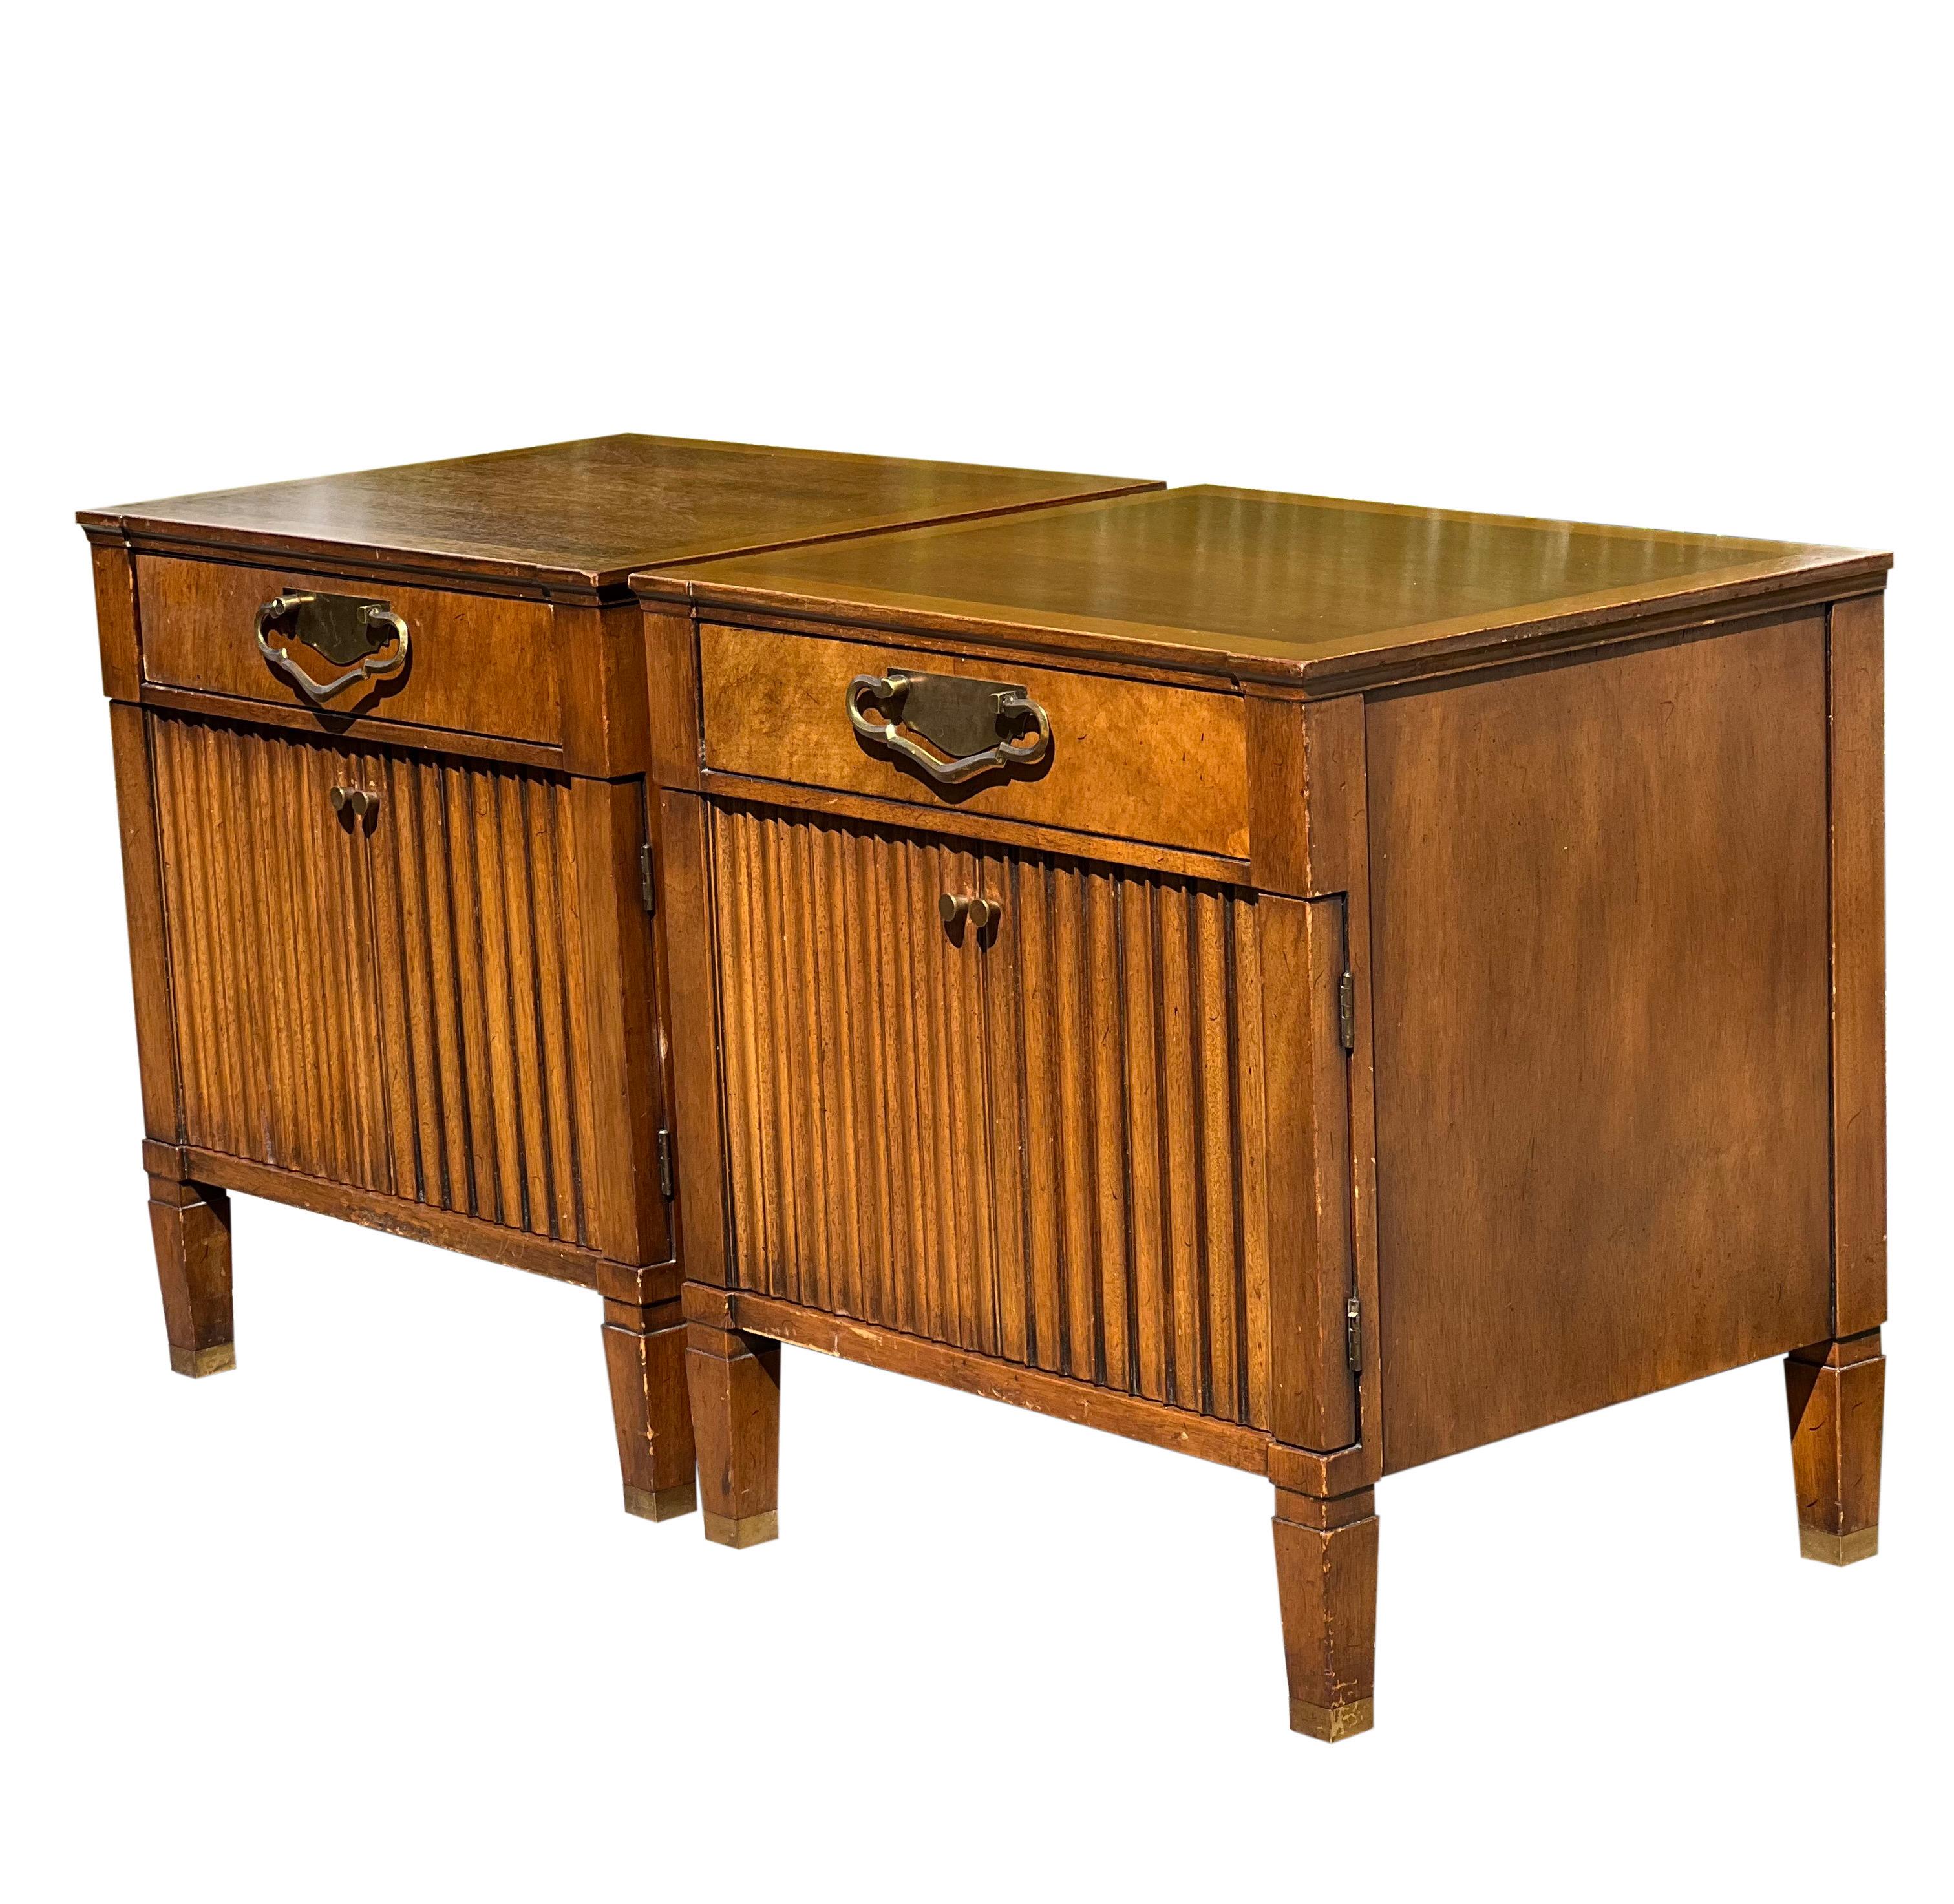 Fabulous Mid Century nightstands by John Stuart for Johnson Furniture Company, 1960's.

Crafted of rich walnut, the nightstands feature elegant oak banding on the tops. Each one has a single drawer and a two door cabinet with carved groove detail.